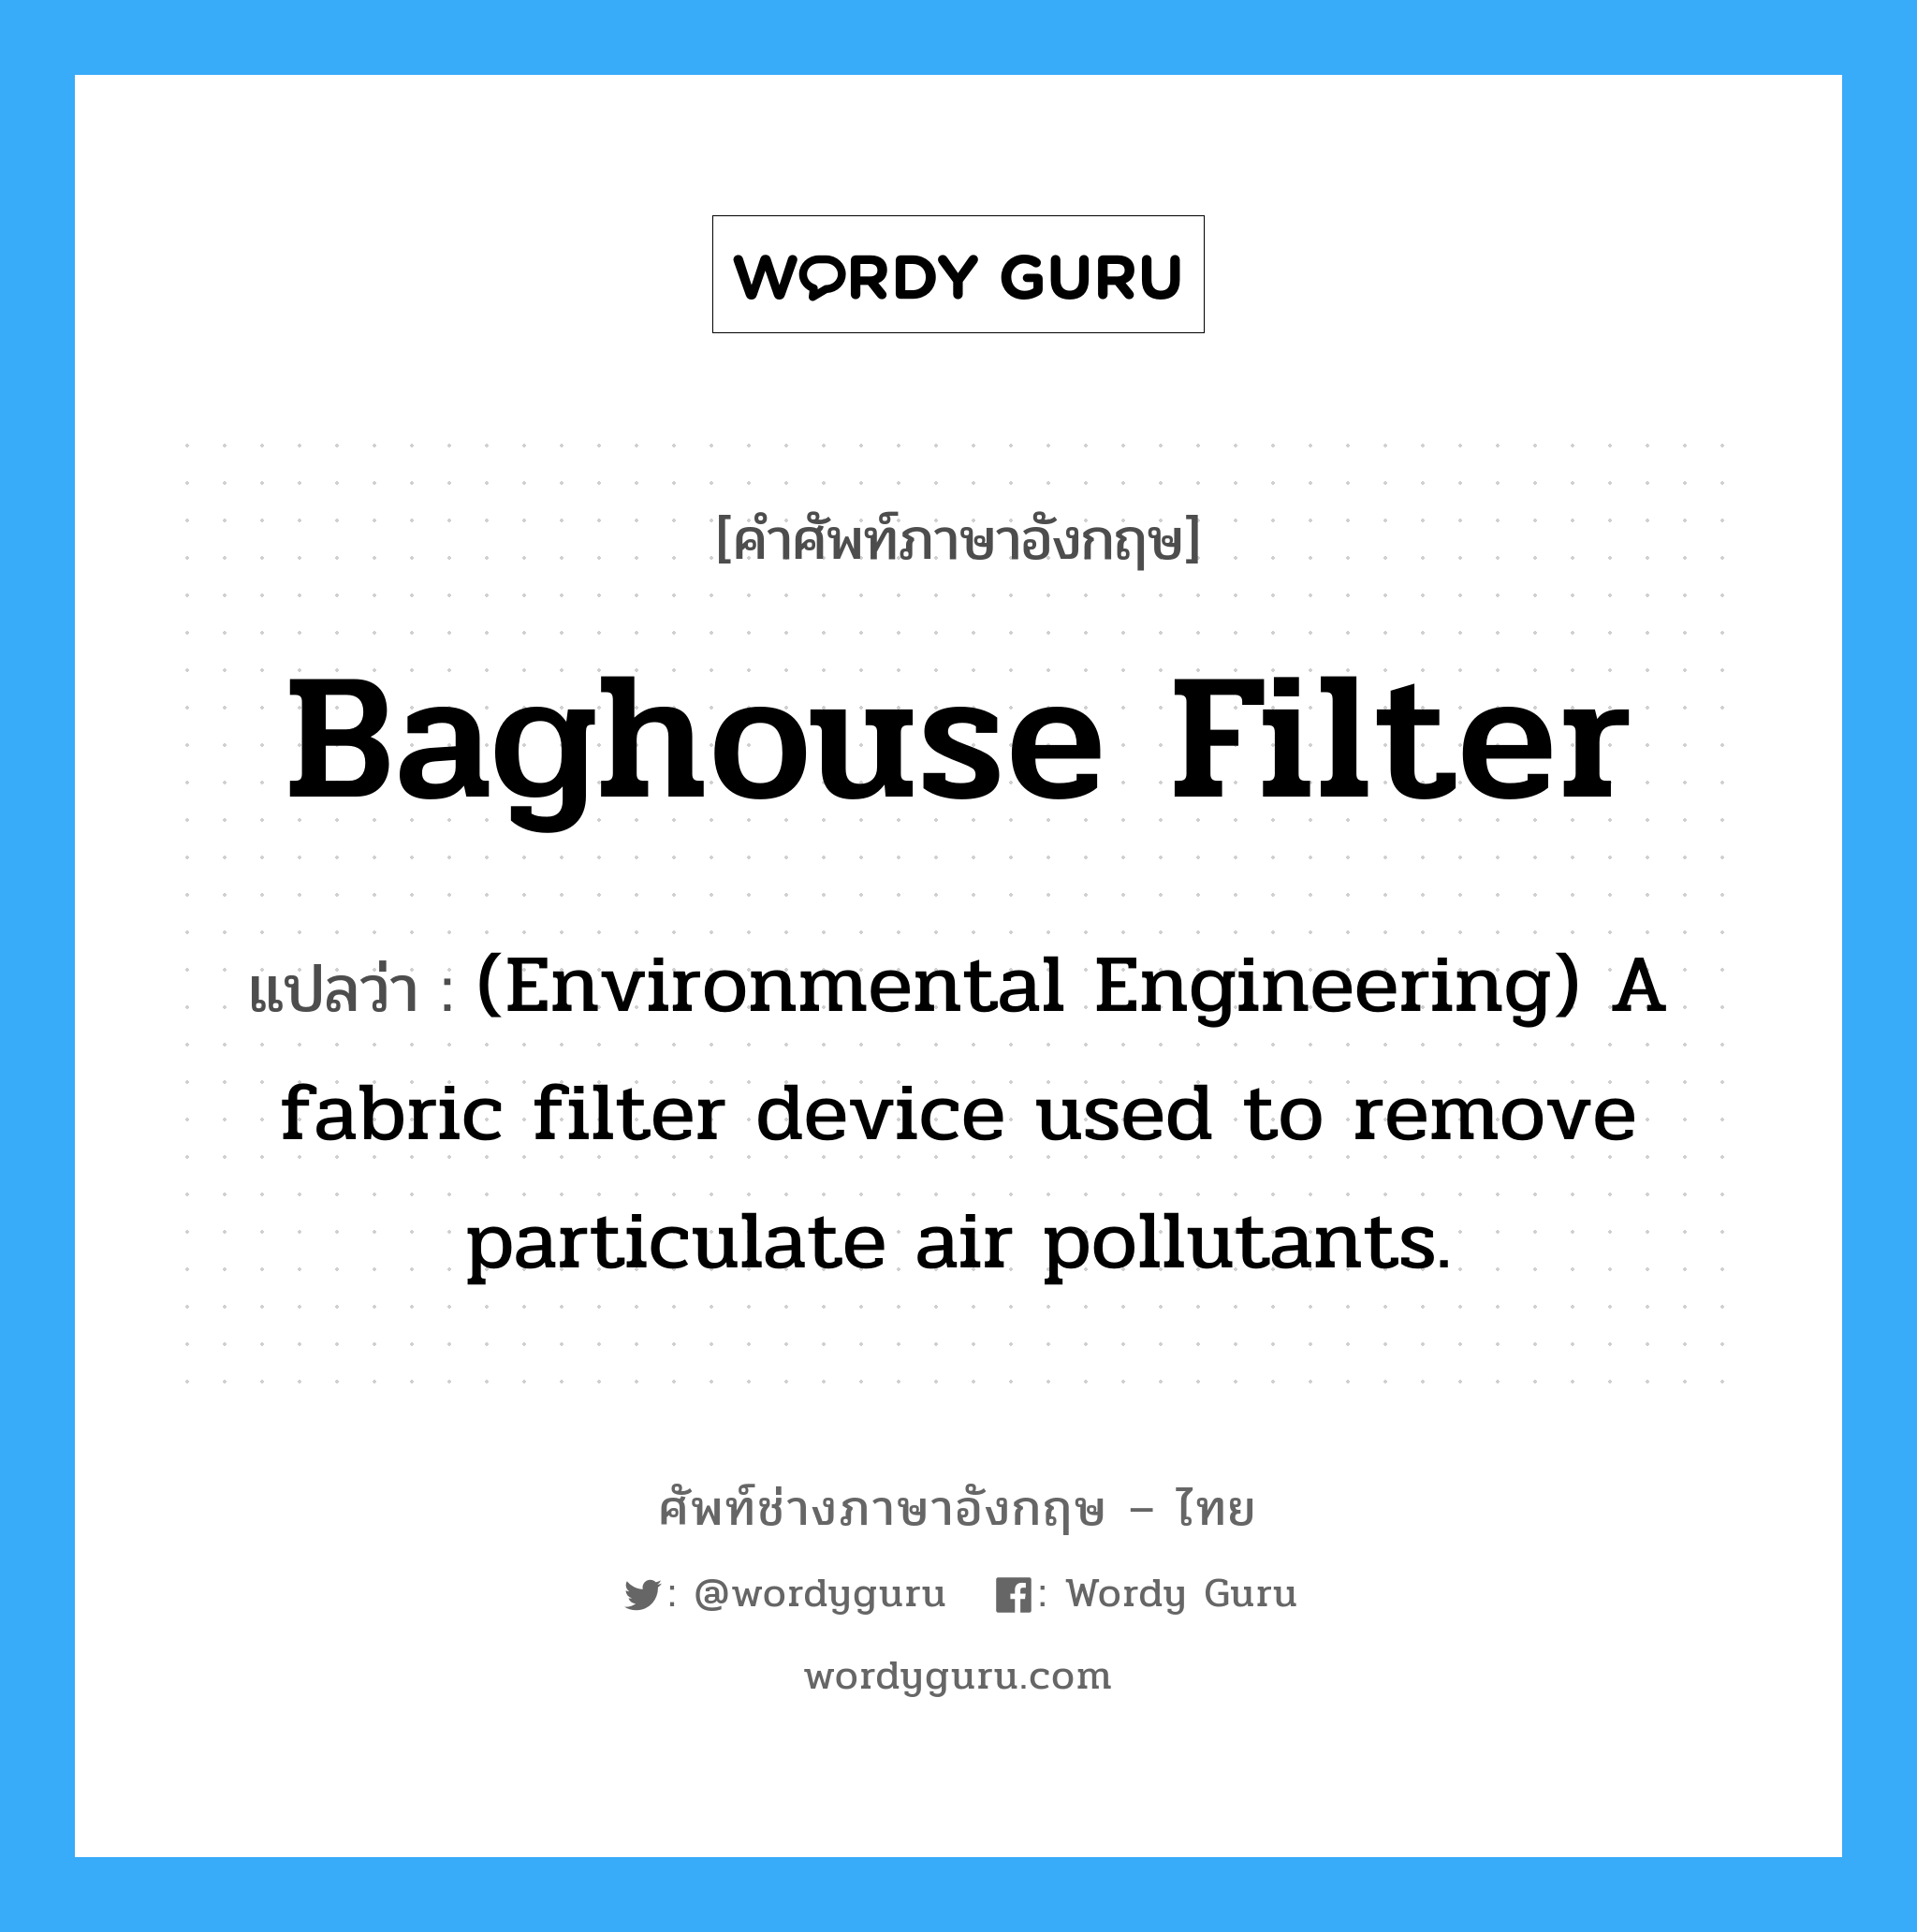 Baghouse filter แปลว่า?, คำศัพท์ช่างภาษาอังกฤษ - ไทย Baghouse filter คำศัพท์ภาษาอังกฤษ Baghouse filter แปลว่า (Environmental Engineering) A fabric filter device used to remove particulate air pollutants.